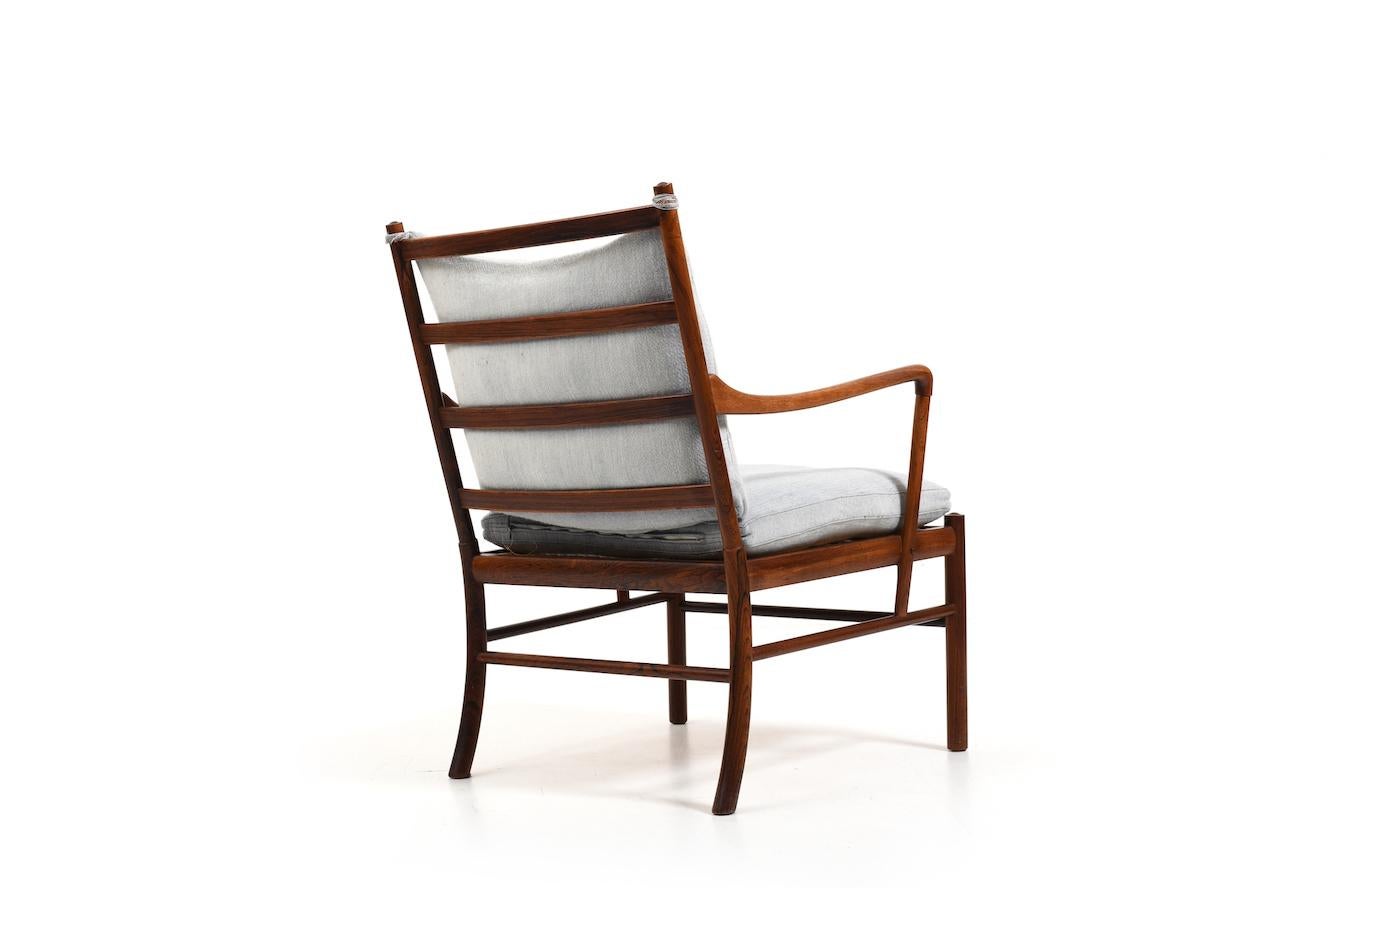 20th Century Vintage PJ-149 Colonial Chair by Ole Wanscher for P. Jeppesen 1949 For Sale